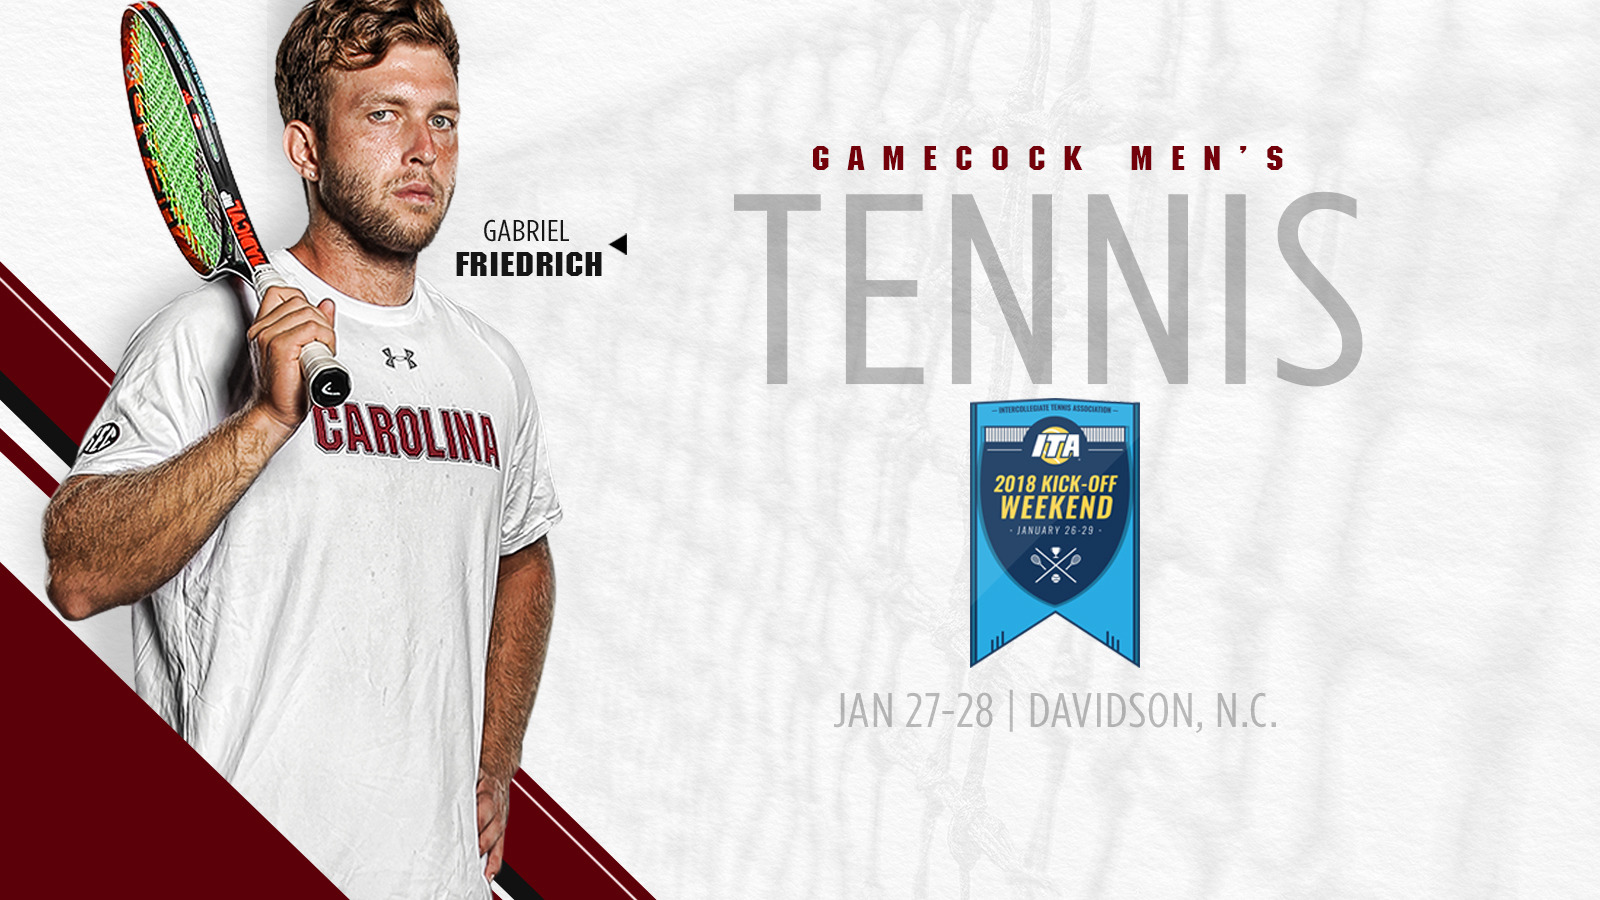 Gamecocks to Compete in ITA Kick-Off Weekend